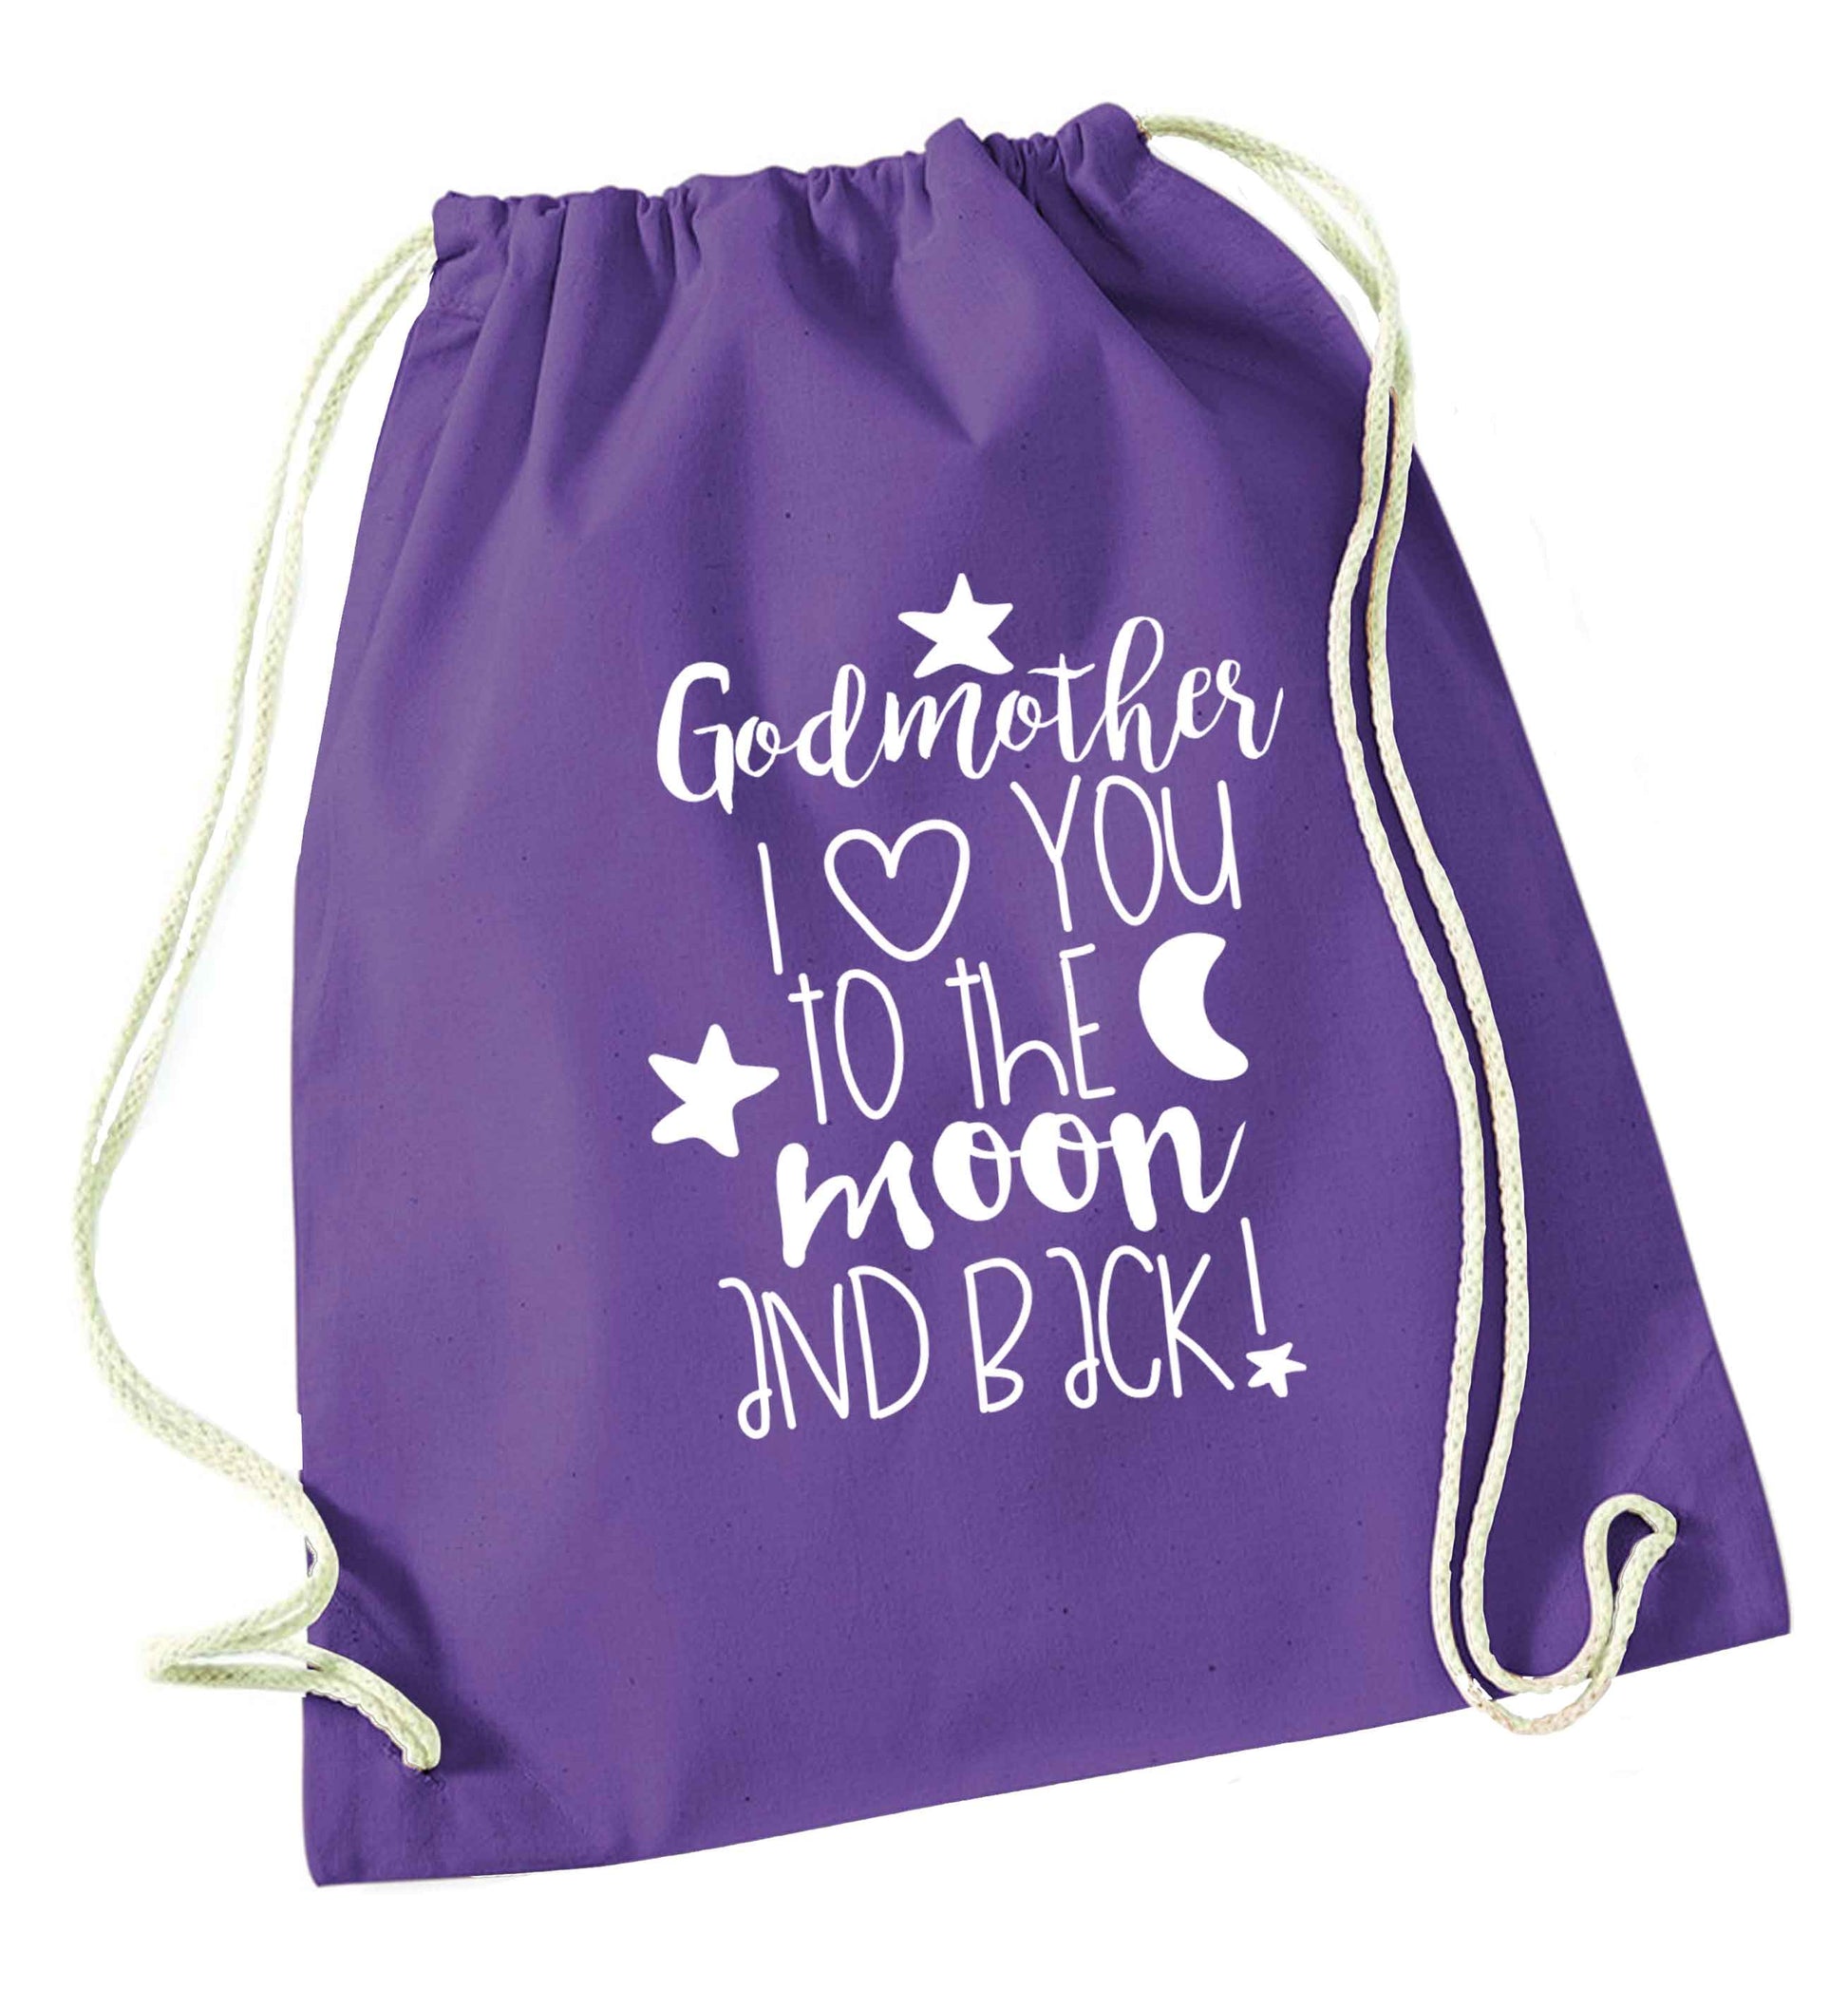 Godmother I love you to the moon and back purple drawstring bag